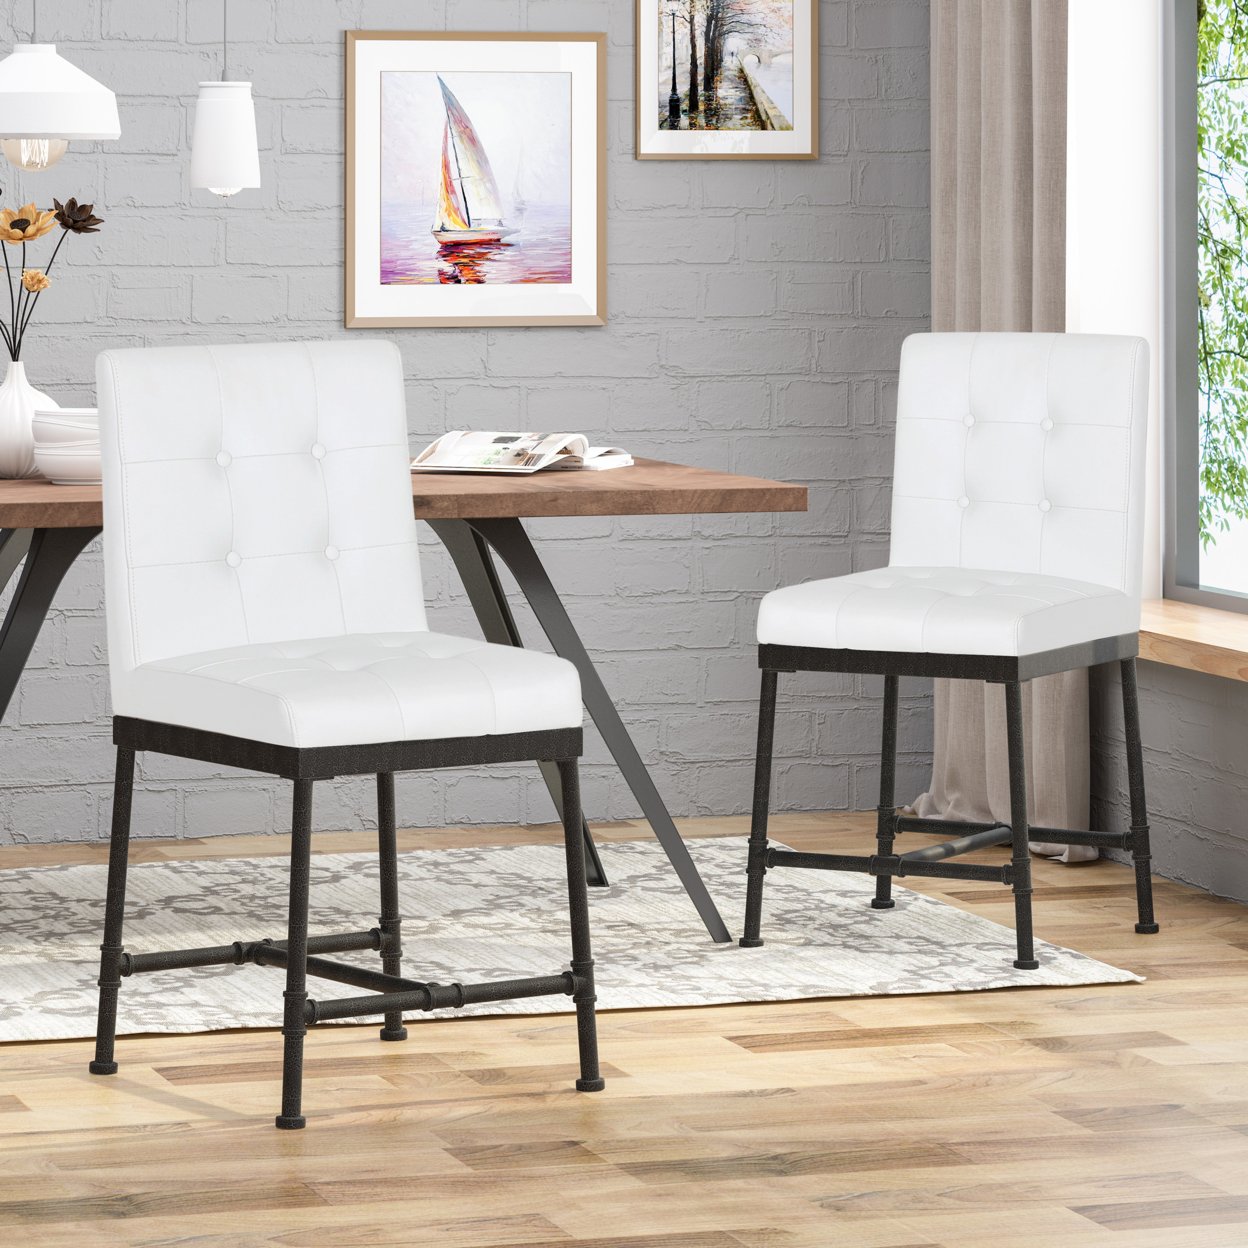 Savannah Industrial Modern 24 Counter Stool With Faux Leather Backing And Metal Pipe Base (Set Of 2) - White + Black